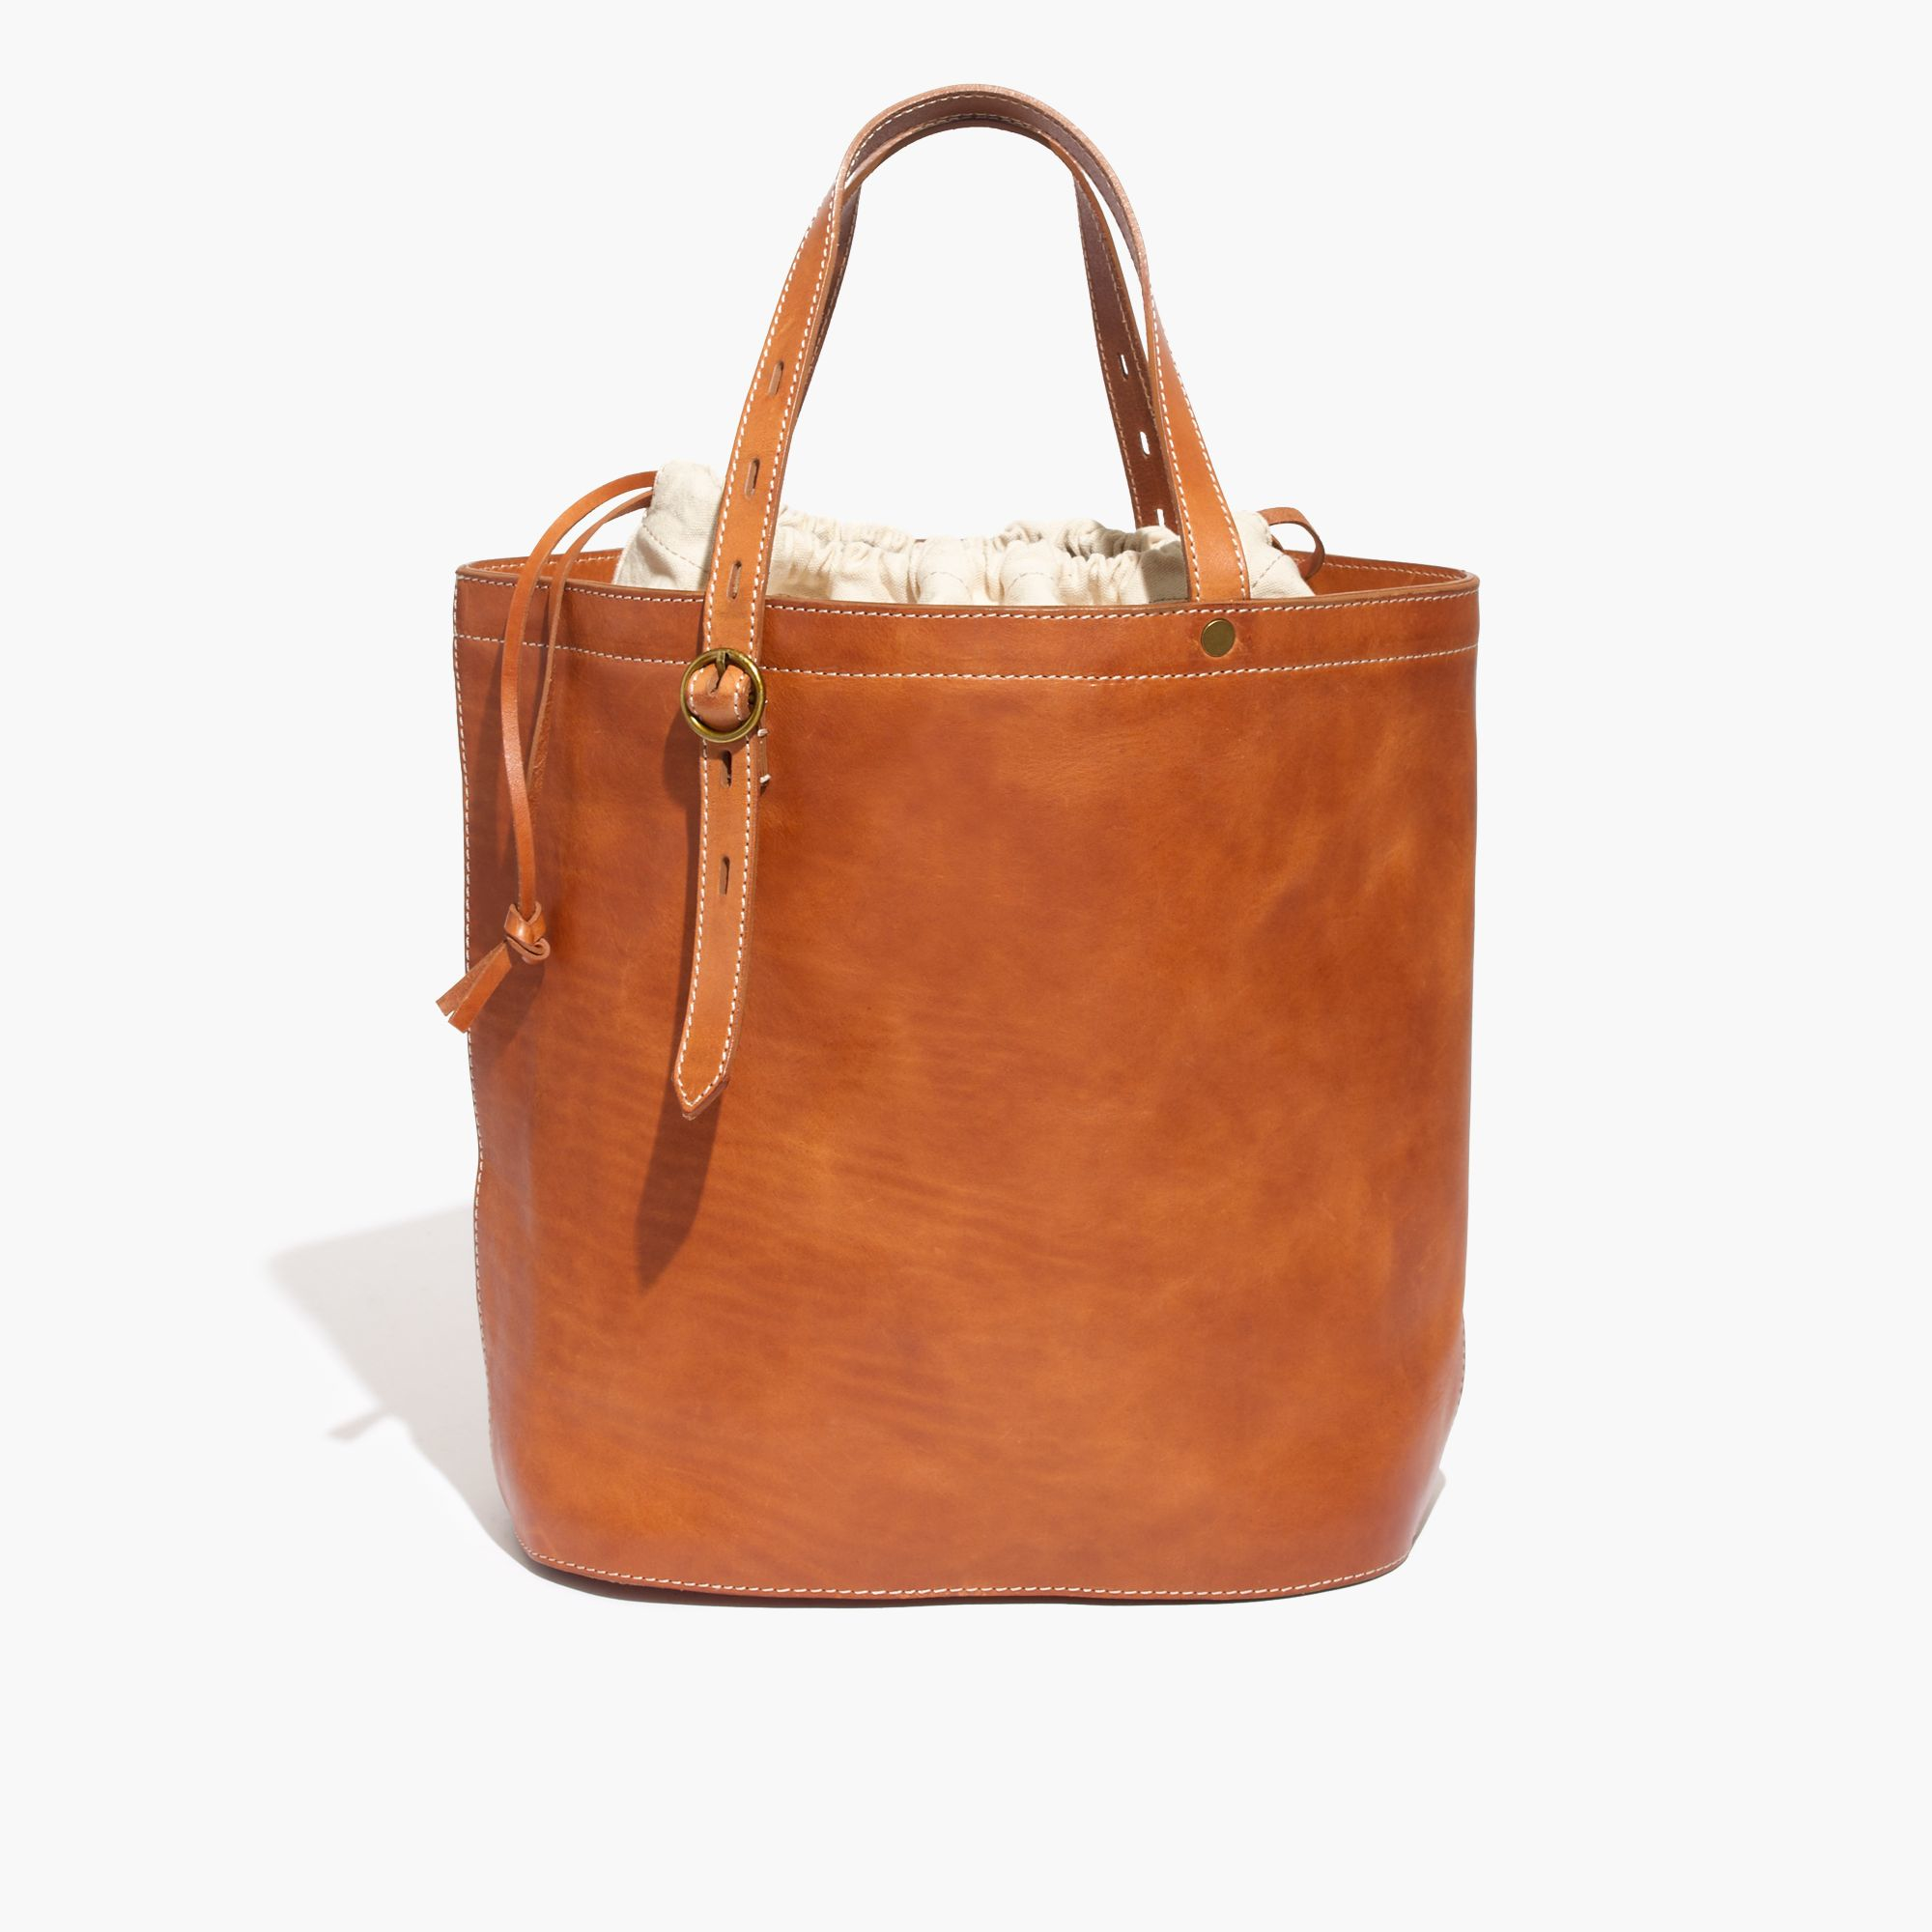 Madewell bags. Madewell Women's The Transport Tote, English Saddle, Tan ...